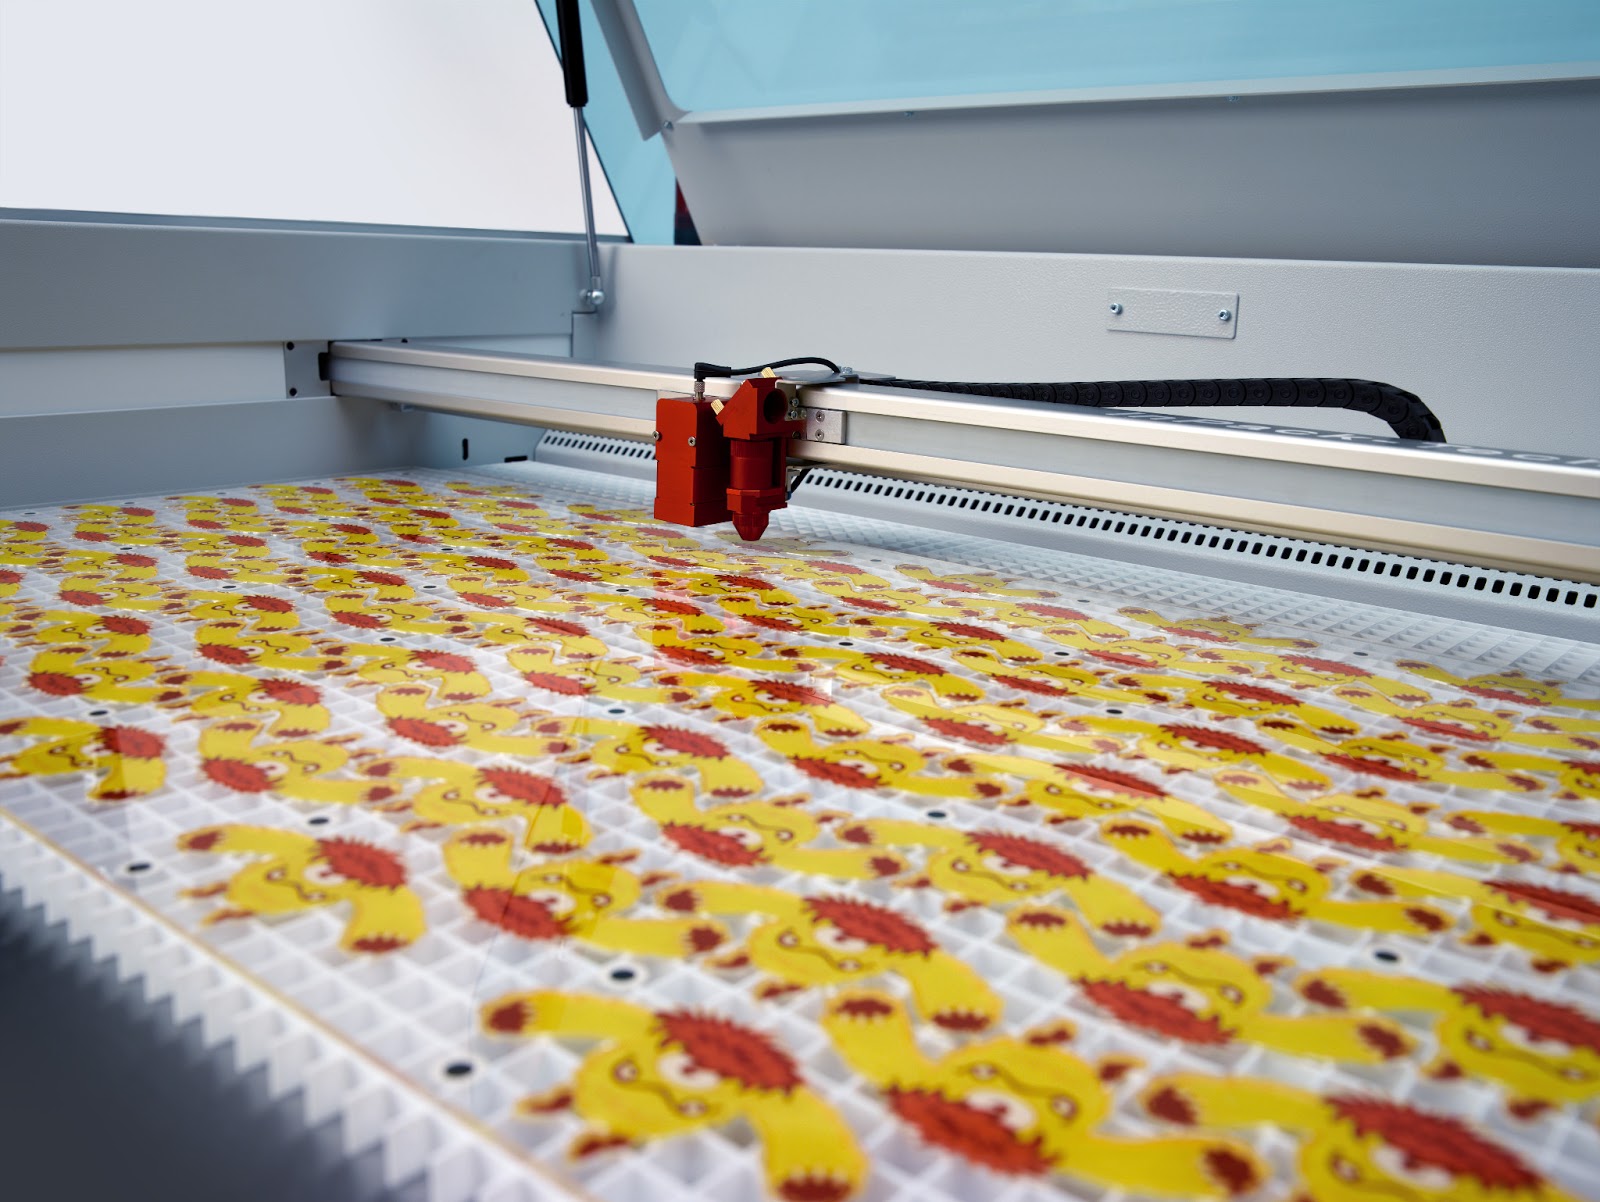 Trotec Laser Online Magazine: Laser Cutting and Digital Printing – A Love Story